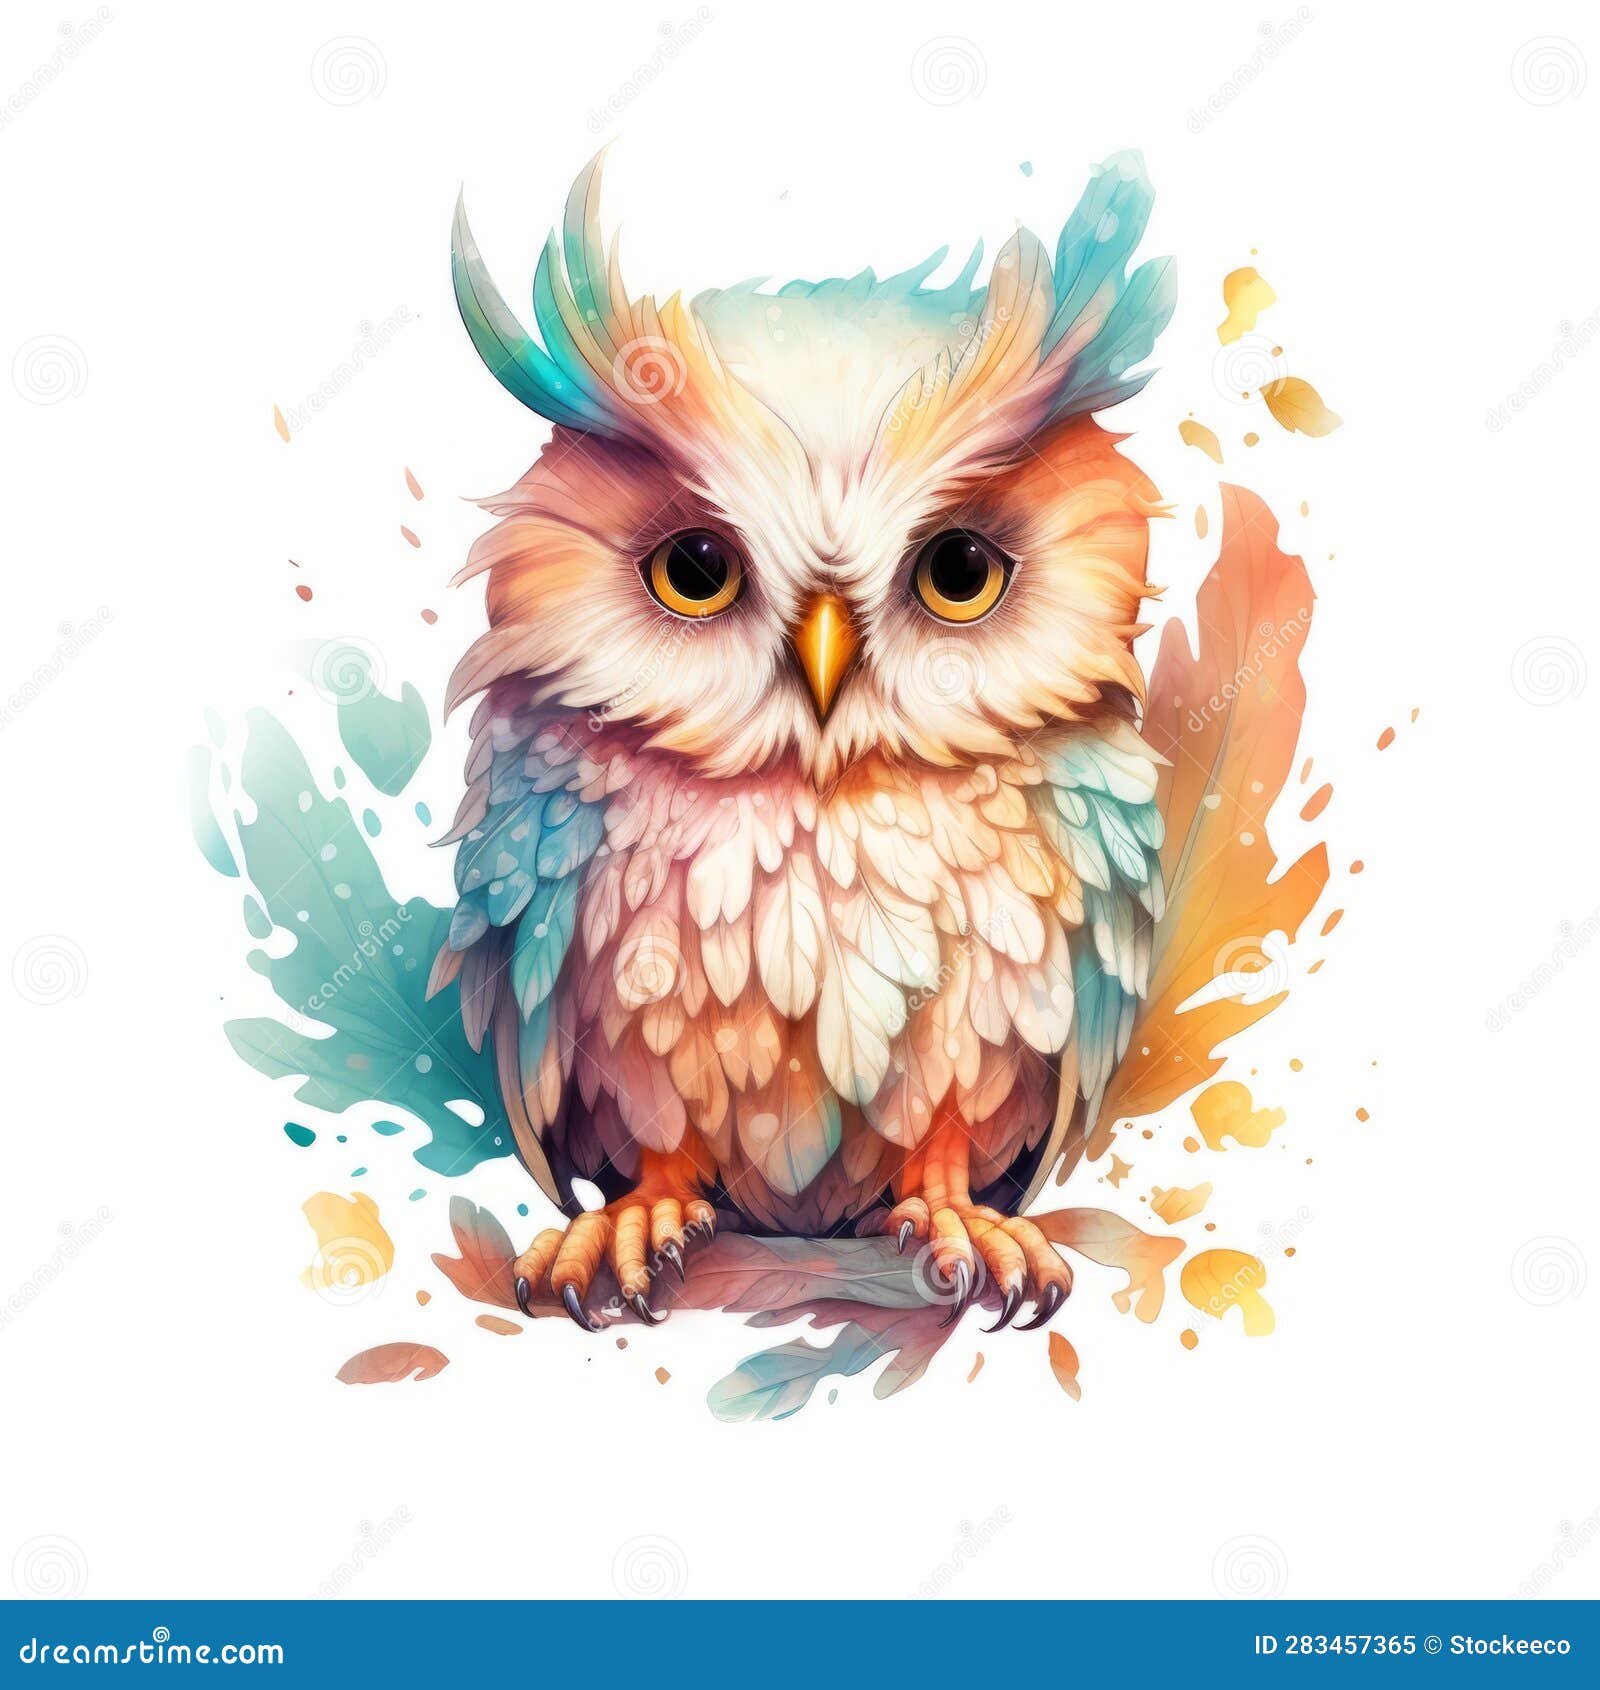 Cute Owl Watercolor Painting Vector Graphics in Disney Style Stock ...